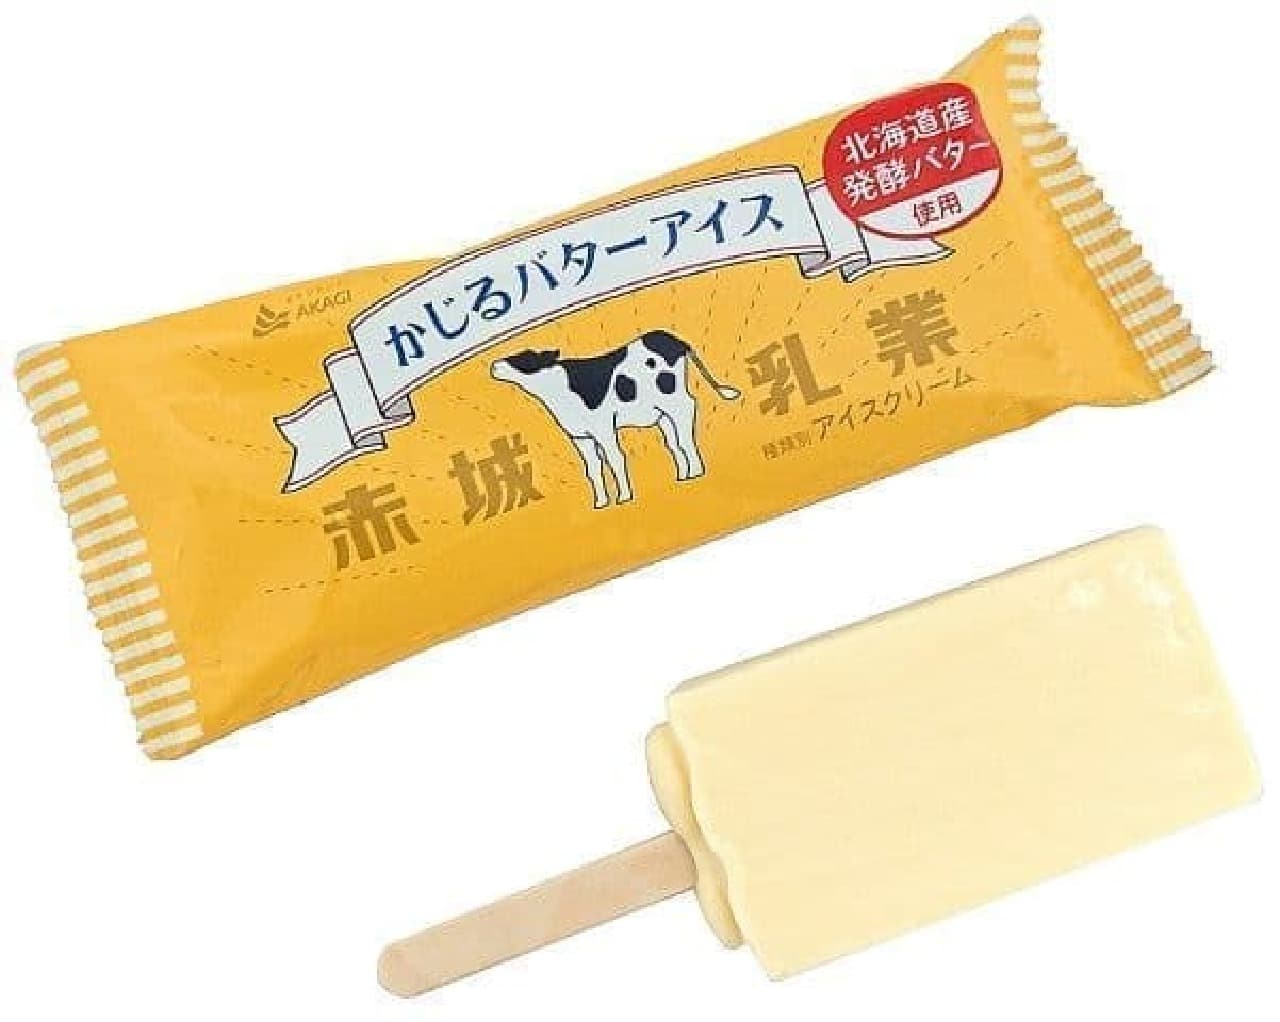 7-ELEVEN "Akagi Gnawing Butter Ice"